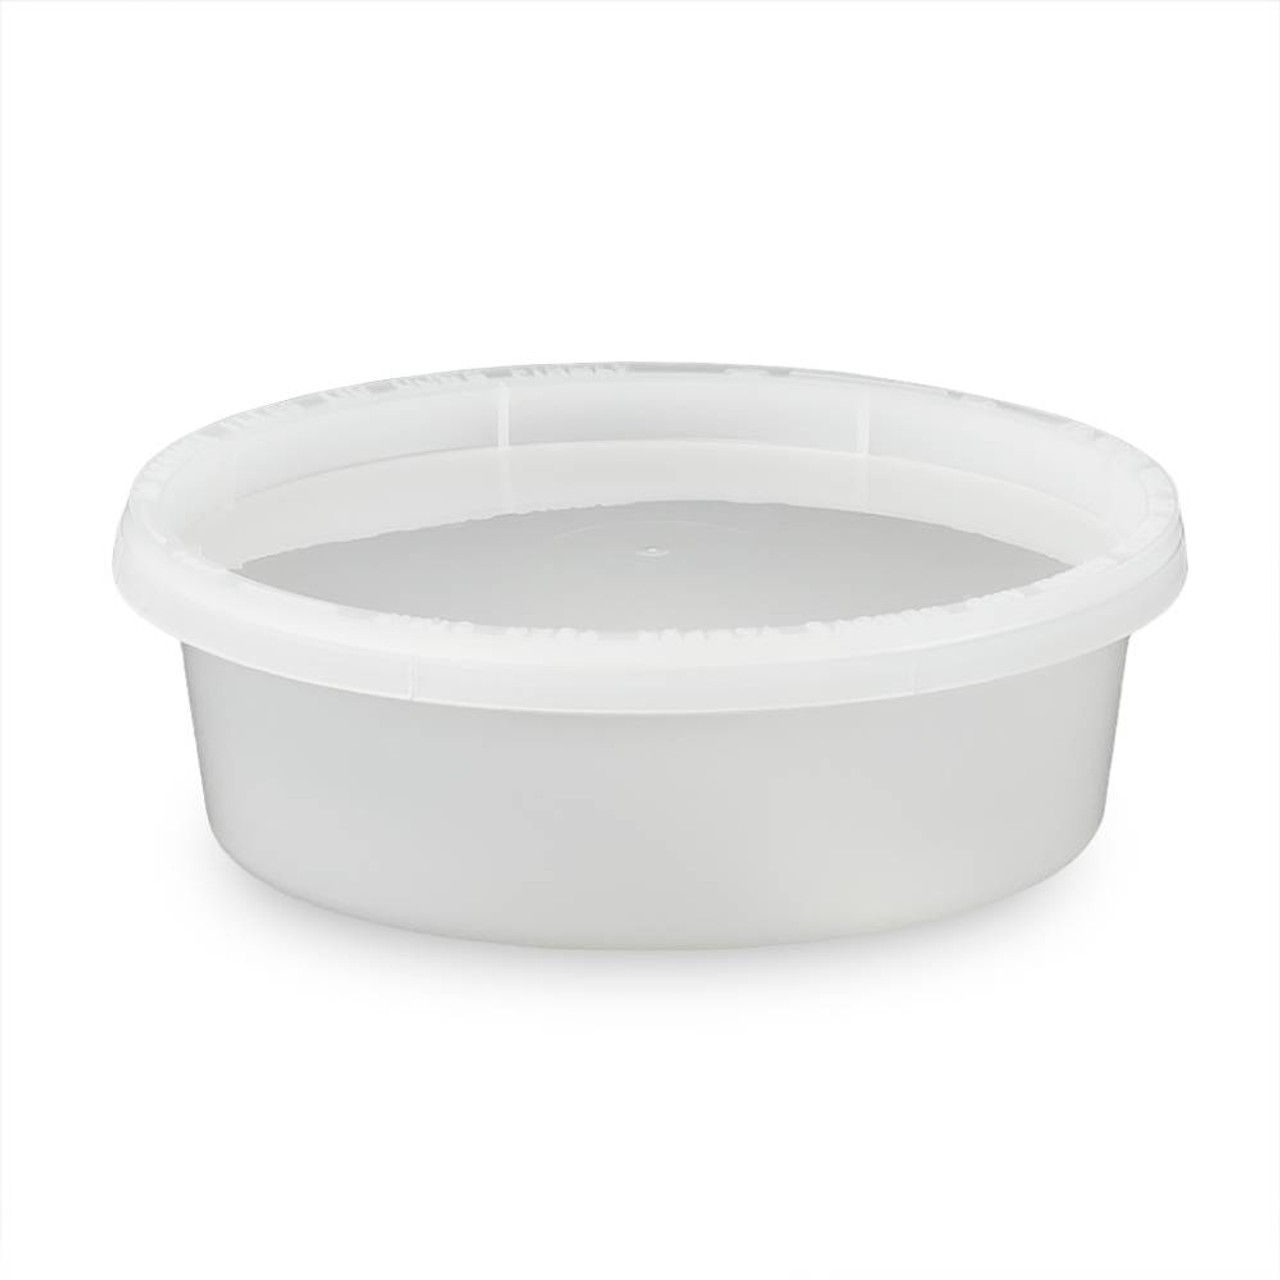 20 oz. BPA Free Food Grade Round Container with Lid (T41020CP & L410) -  starting quantity 25 count - FREE SHIPPING